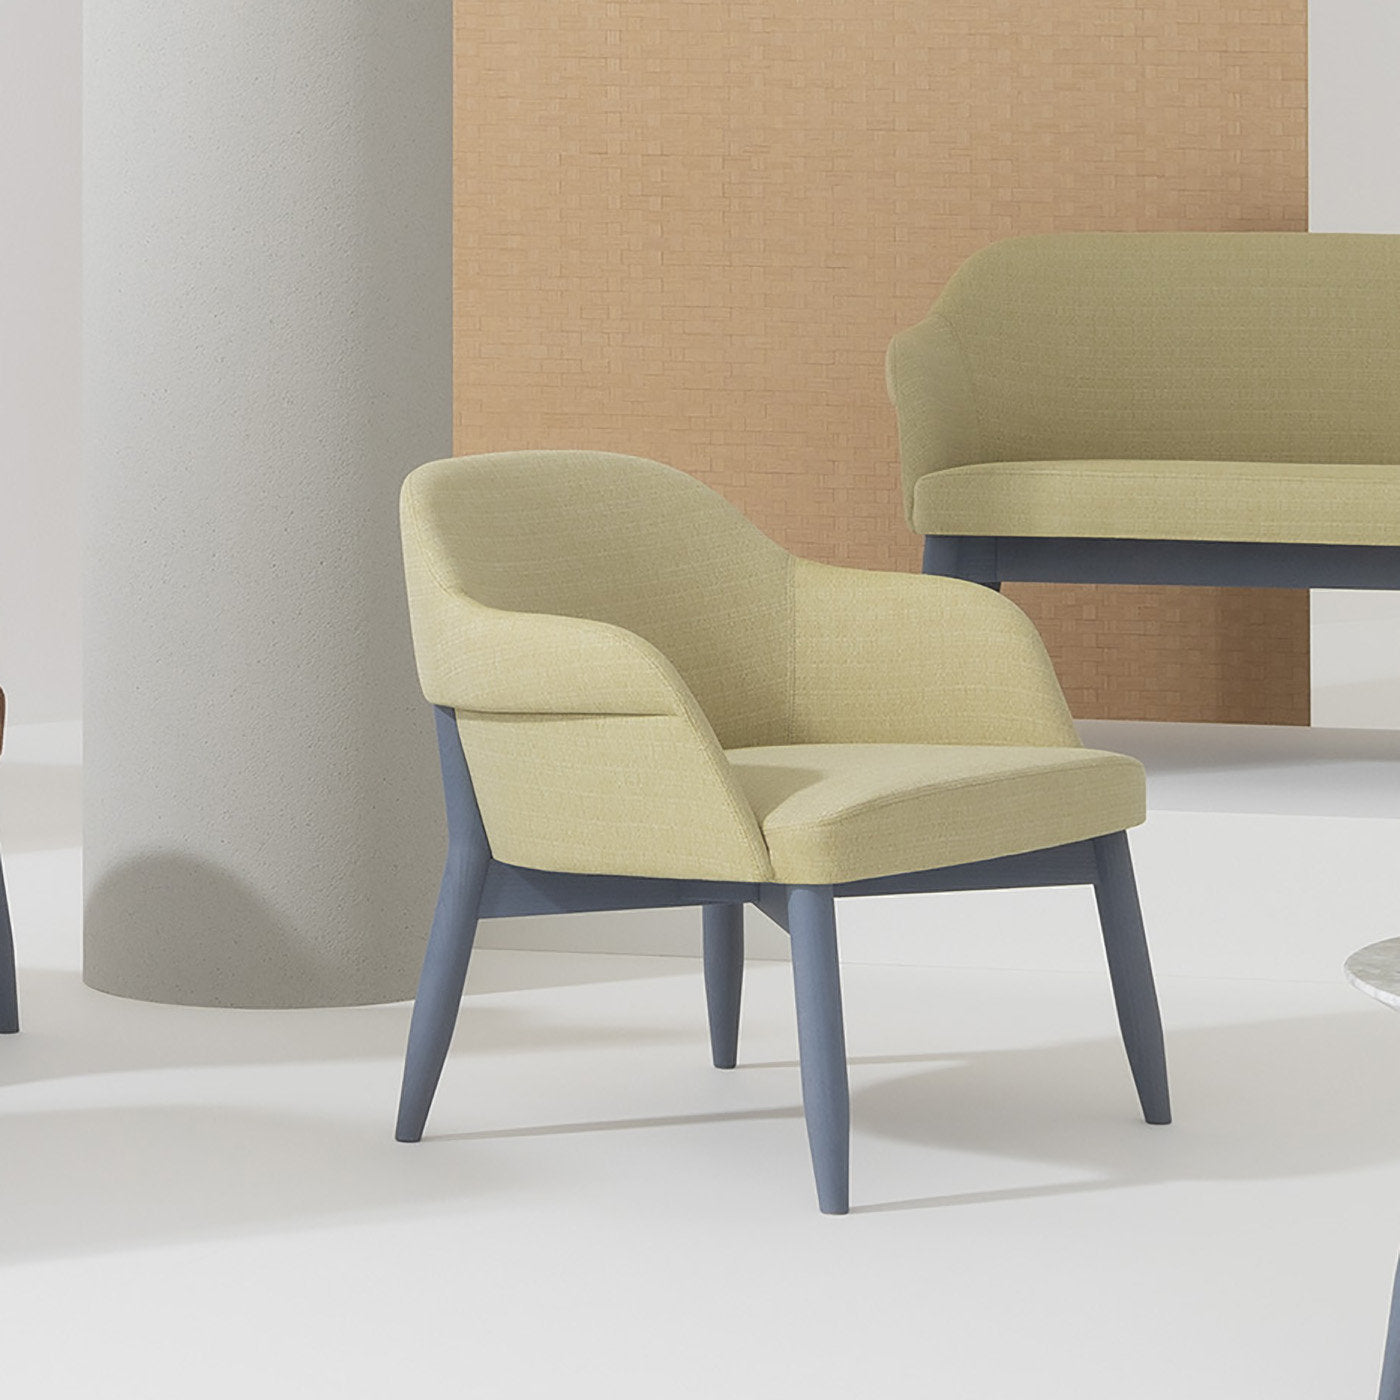 Spy 651 Yellow and Blue Armchair by Emilio Nanni - Alternative view 1